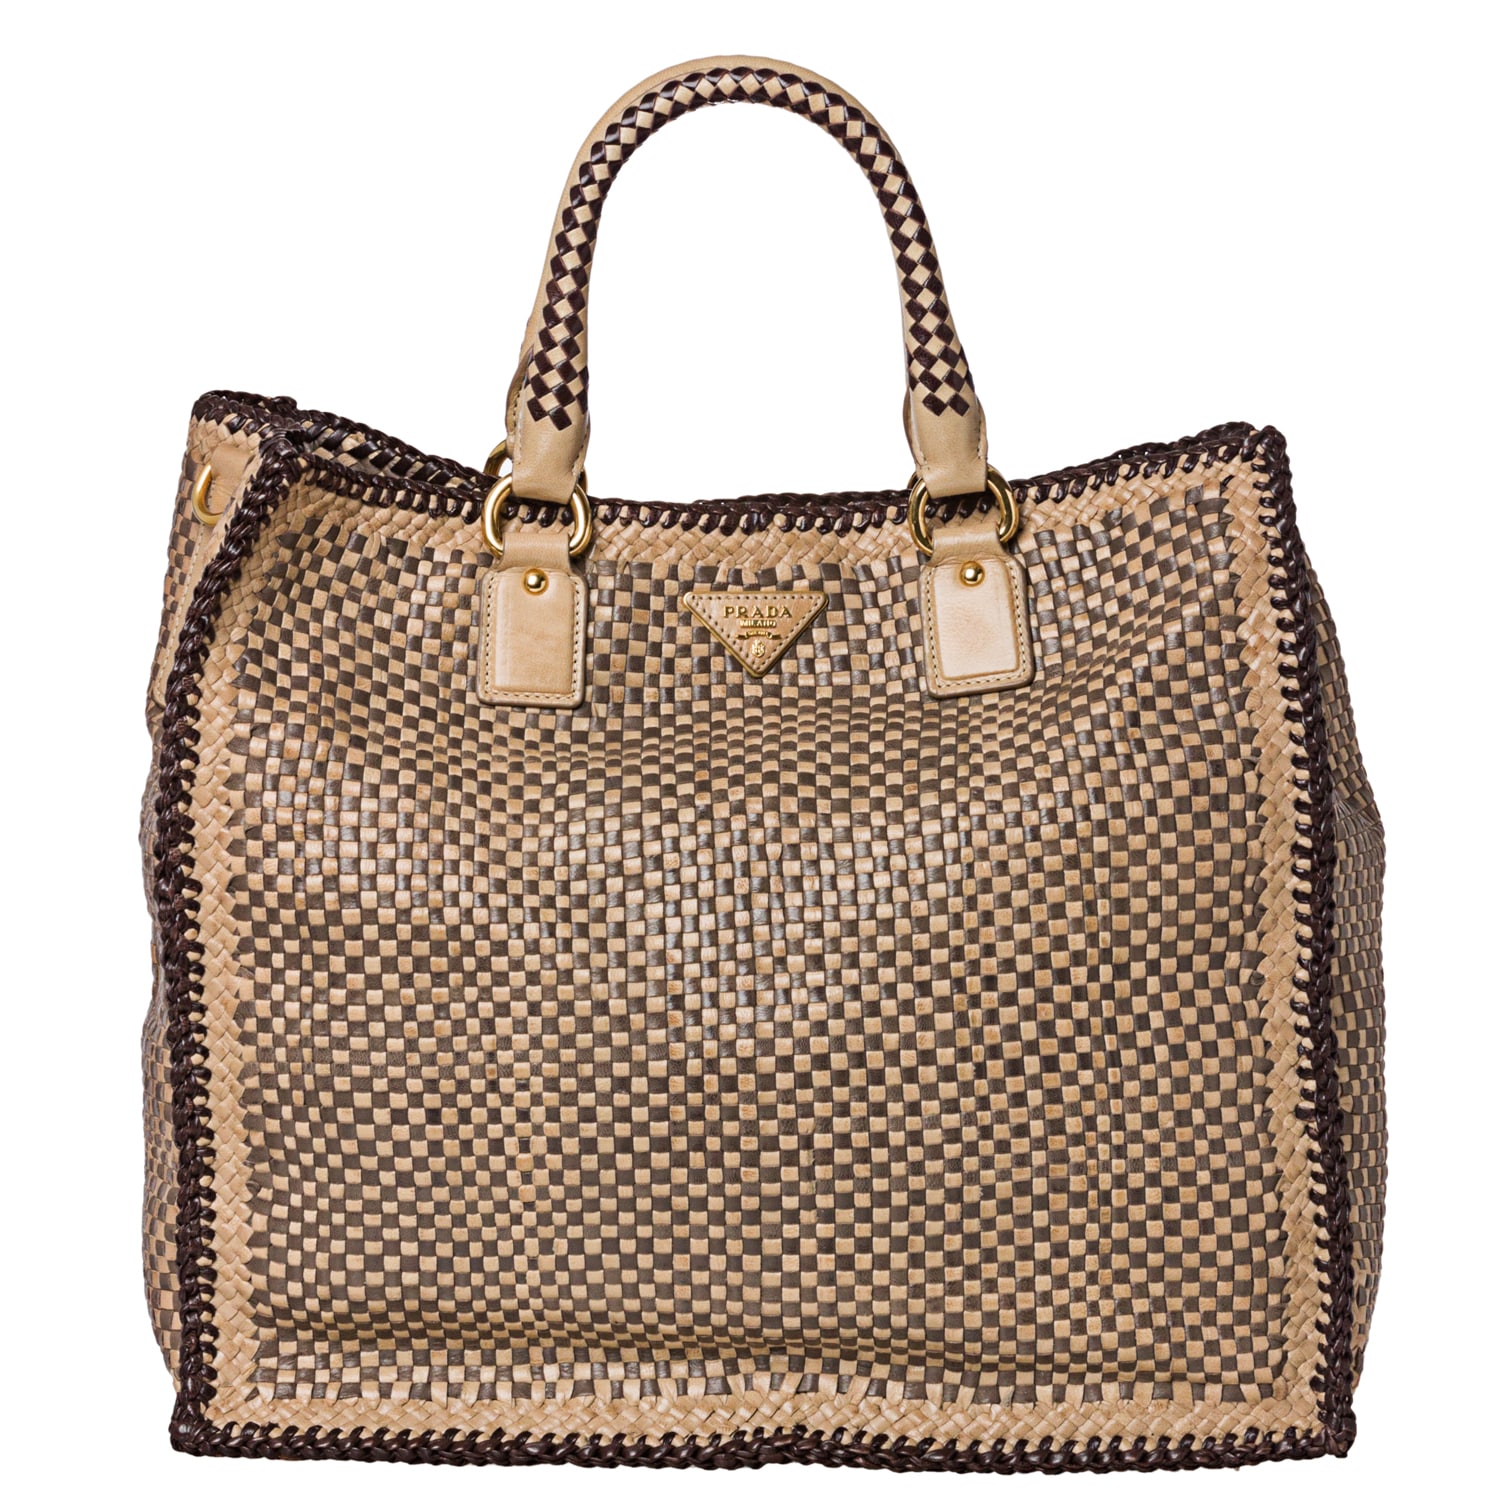 Prada Woven Tan/ Taupe Leather Madras Tote Bag - Free Shipping Today ...